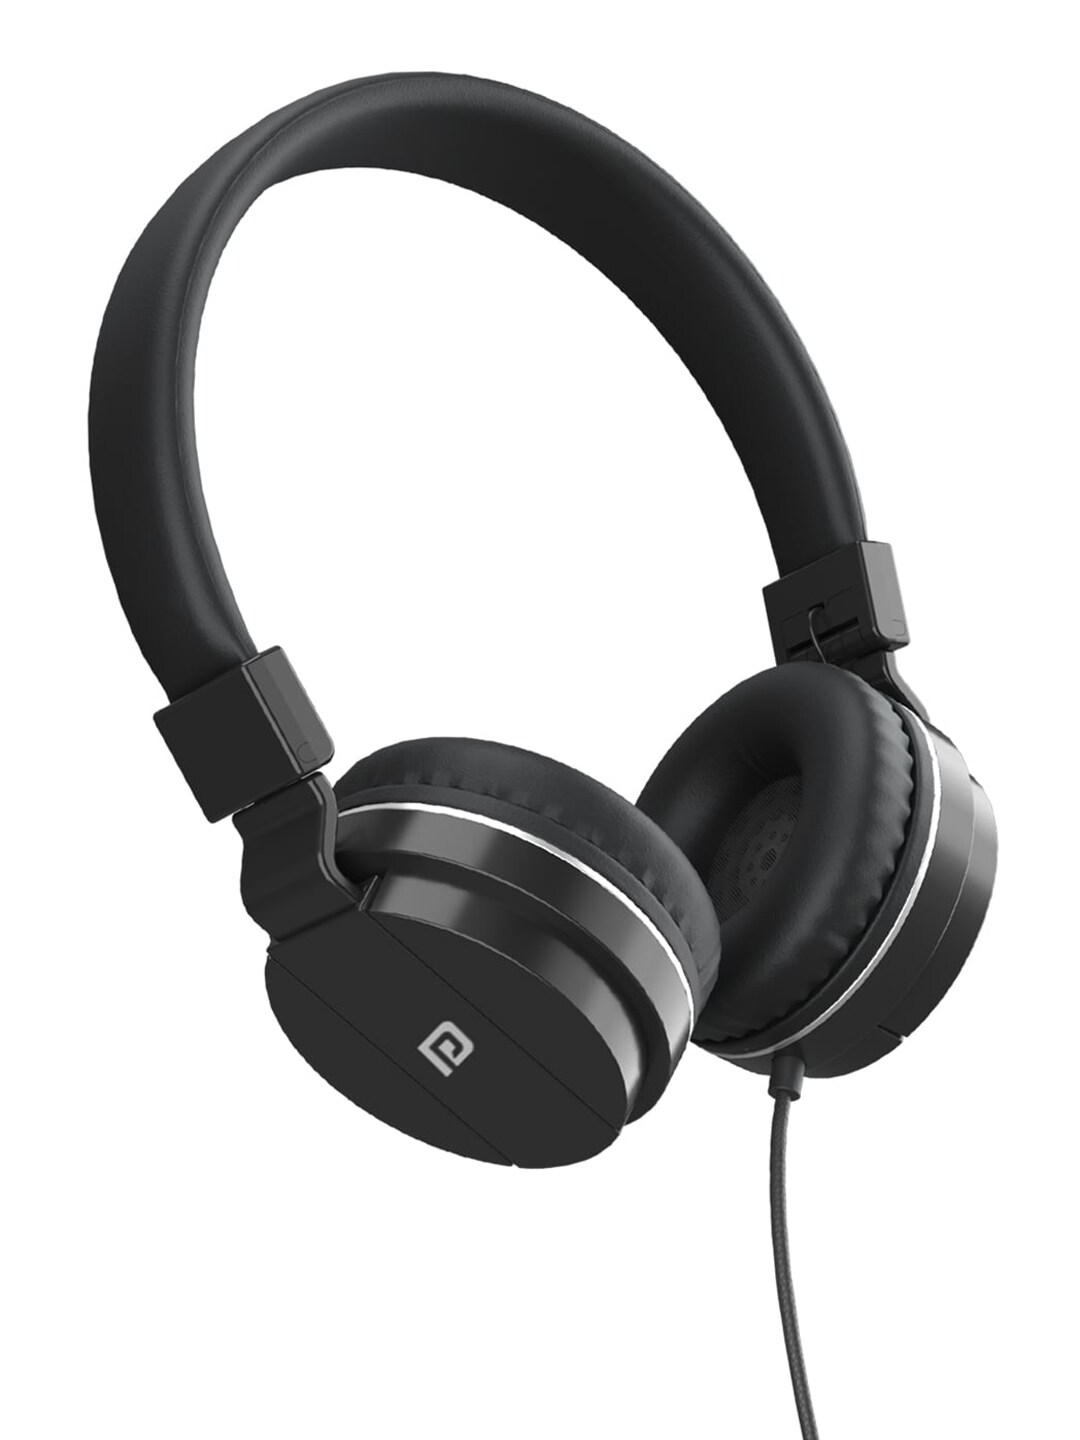 Portronics Black Solid Foldable On-Ear Wired Headphone Price in India